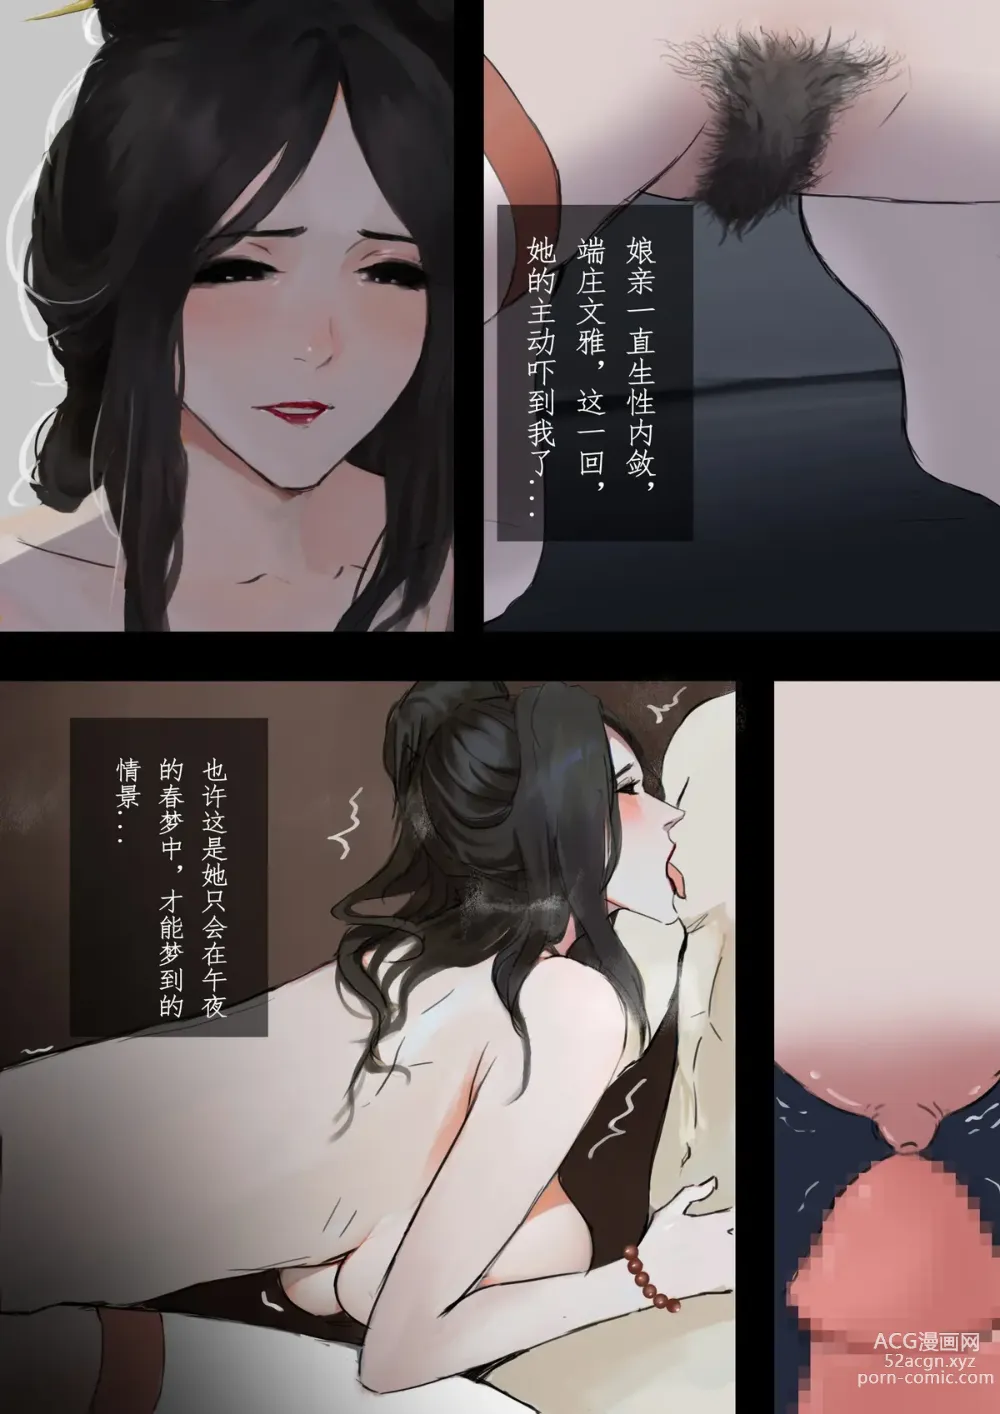 Page 36 of doujinshi 砂中莲